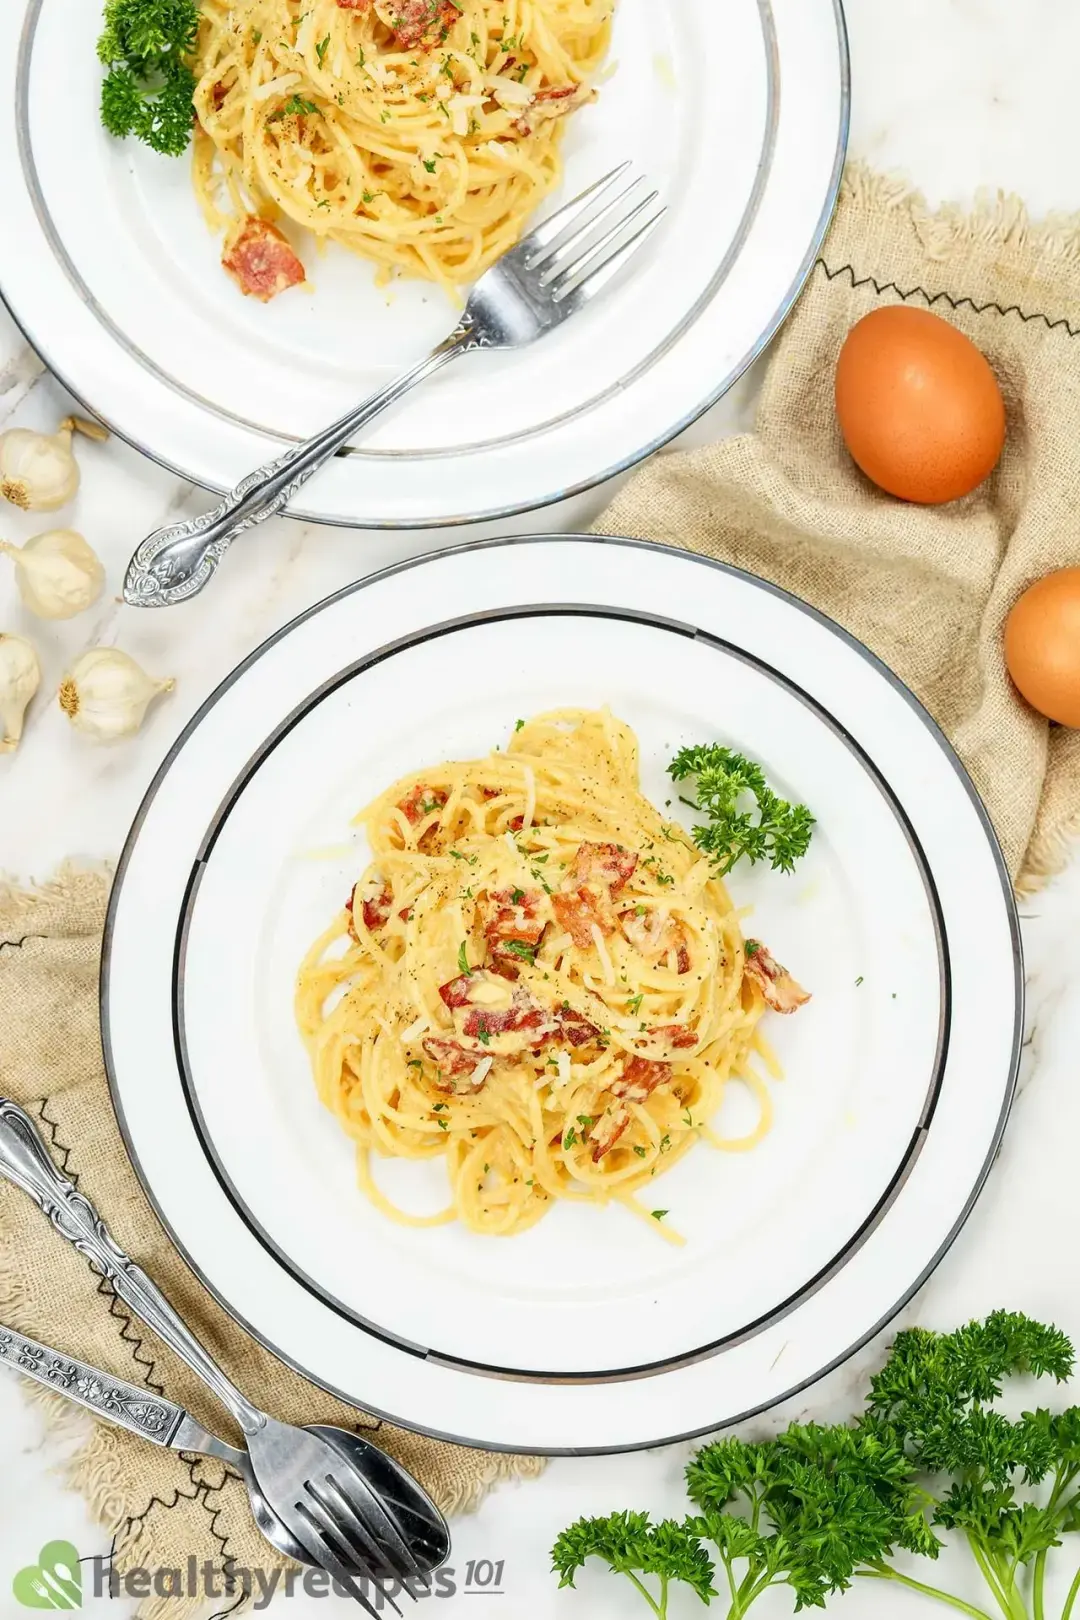 Tips for Cooking Perfect Carbonara